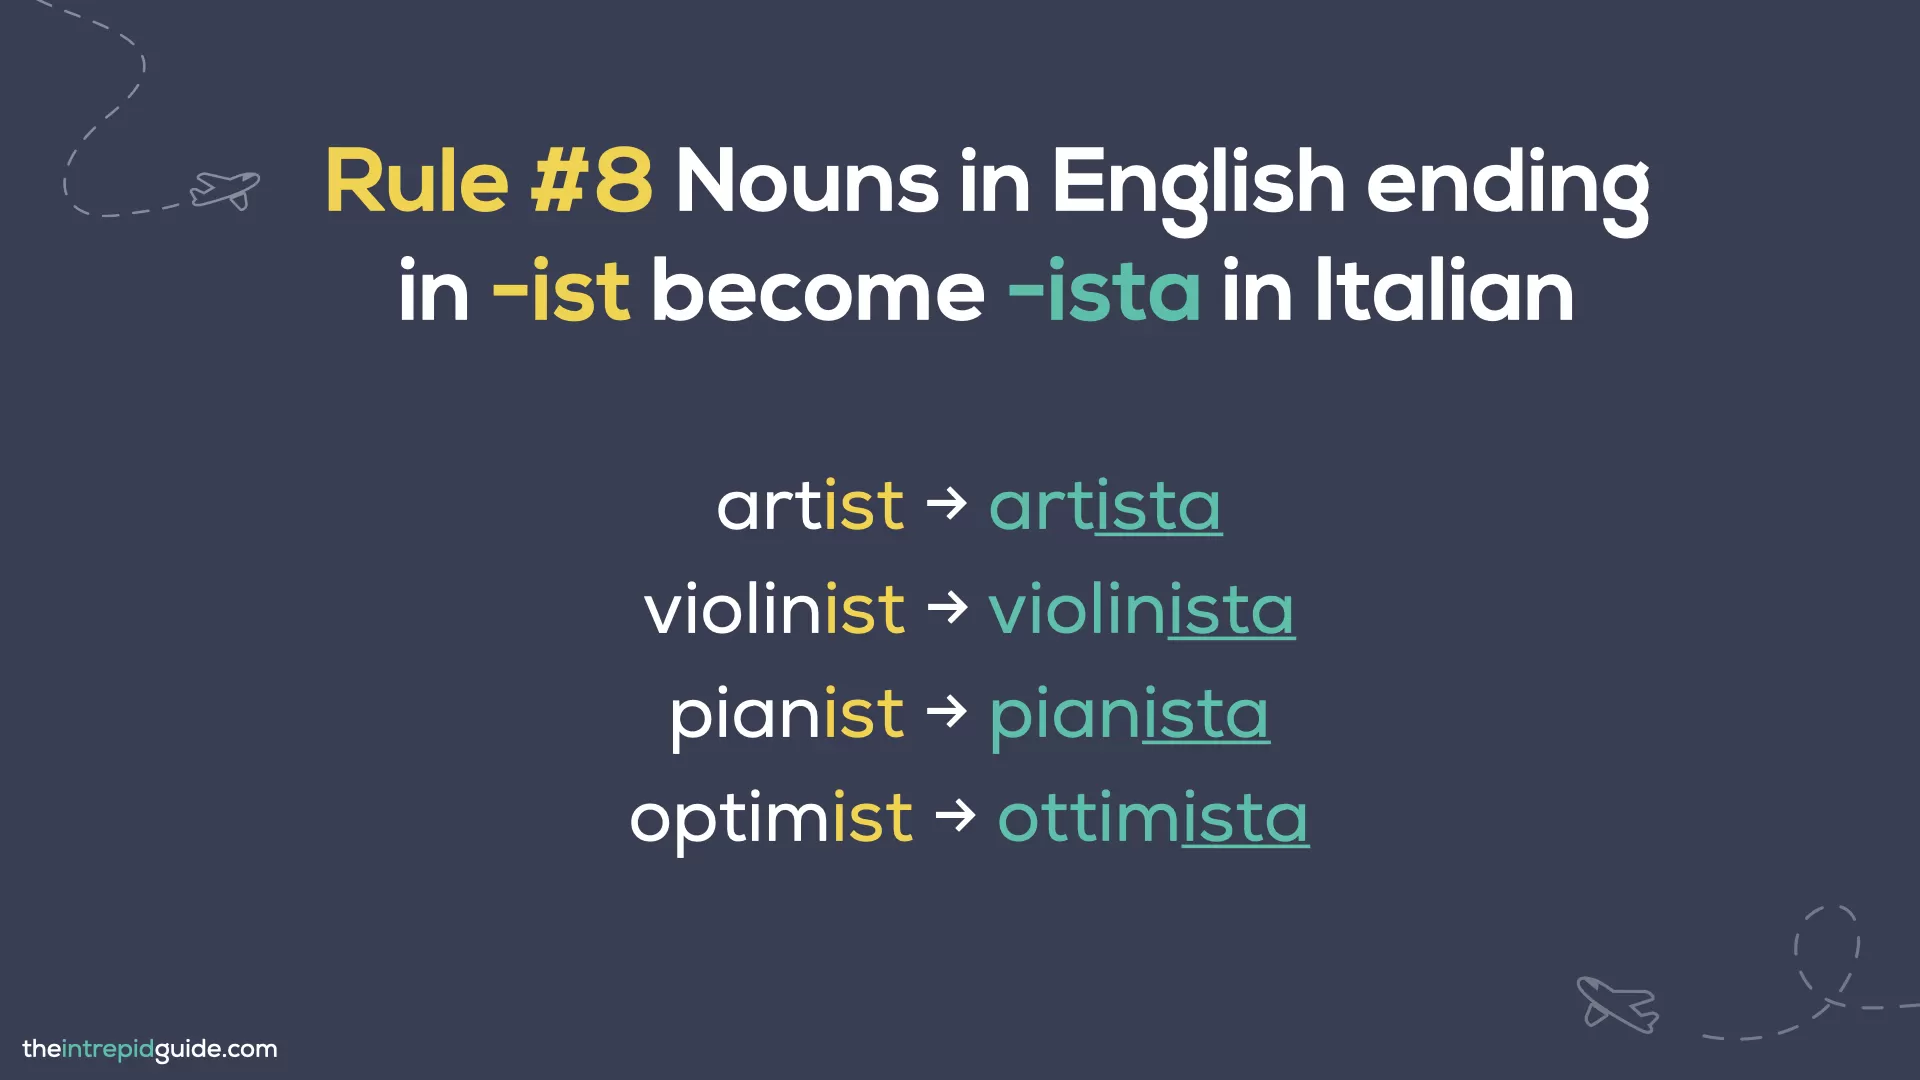 Italian cognates and loan words - Rule 8 - Nouns in English ending in -ist become -ista in Italian